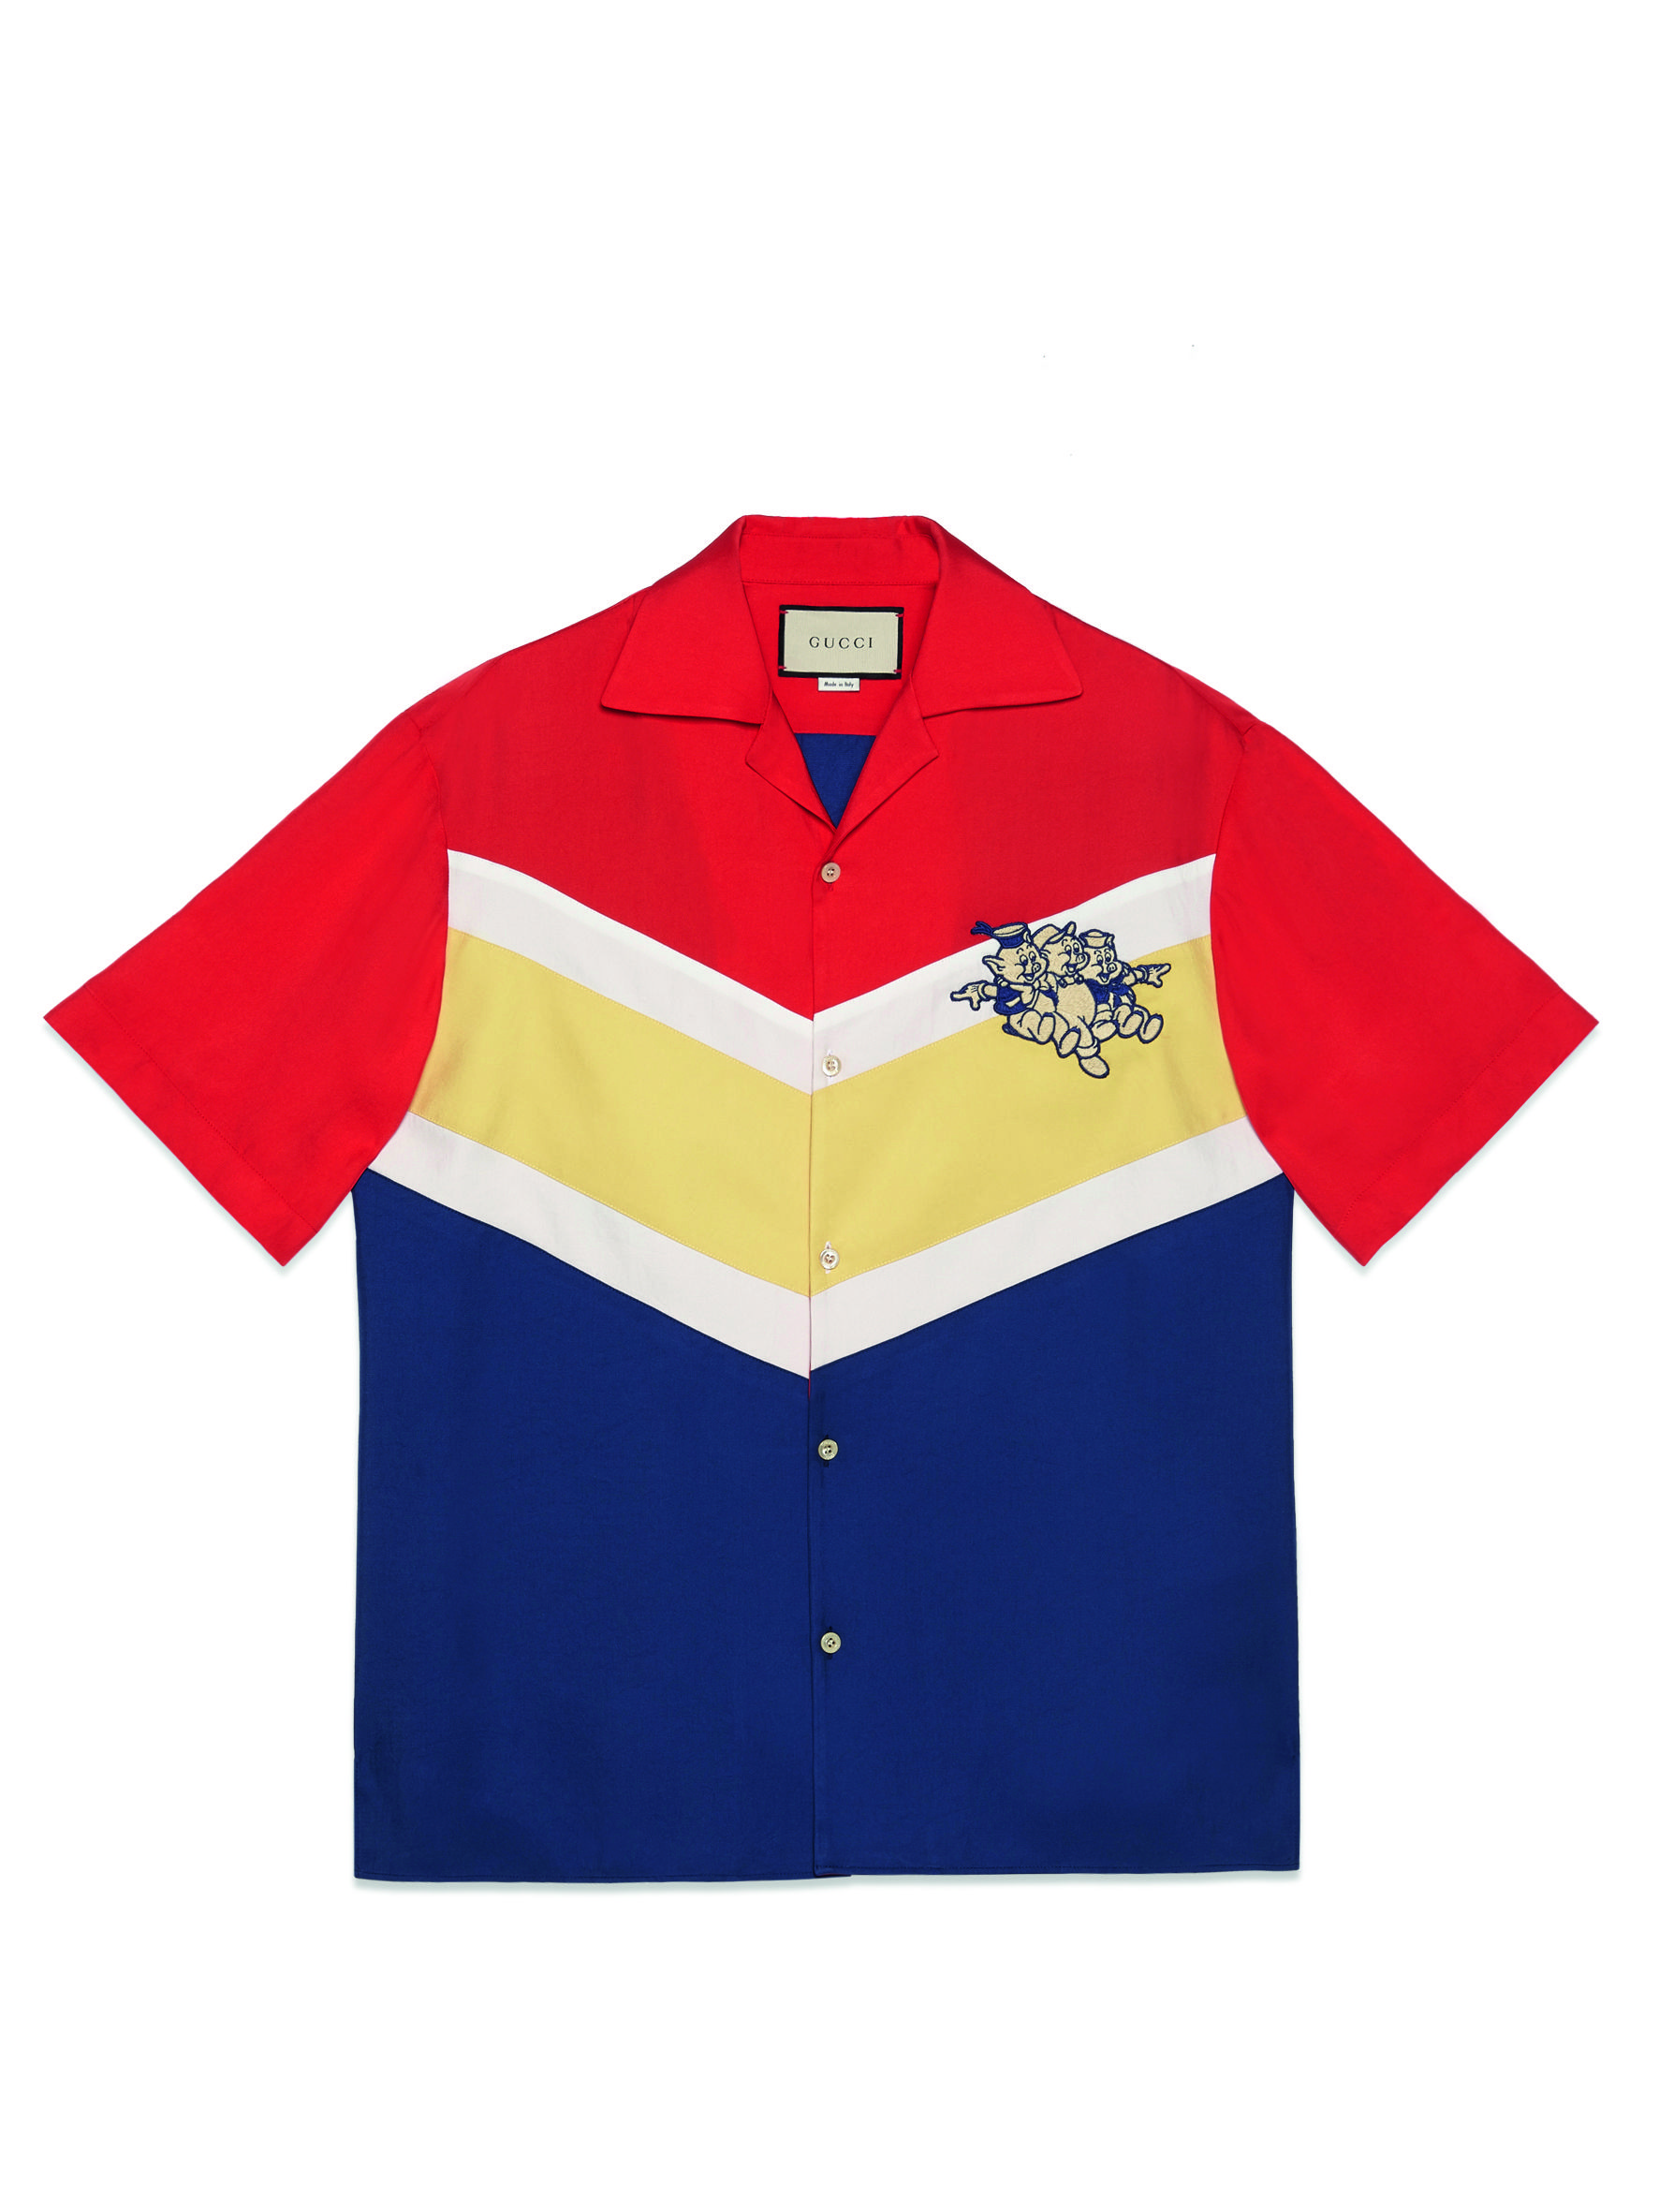 T-shirt, Clothing, Red, Sleeve, Flag, Polo shirt, Collar, Outerwear, Top, Brand, 